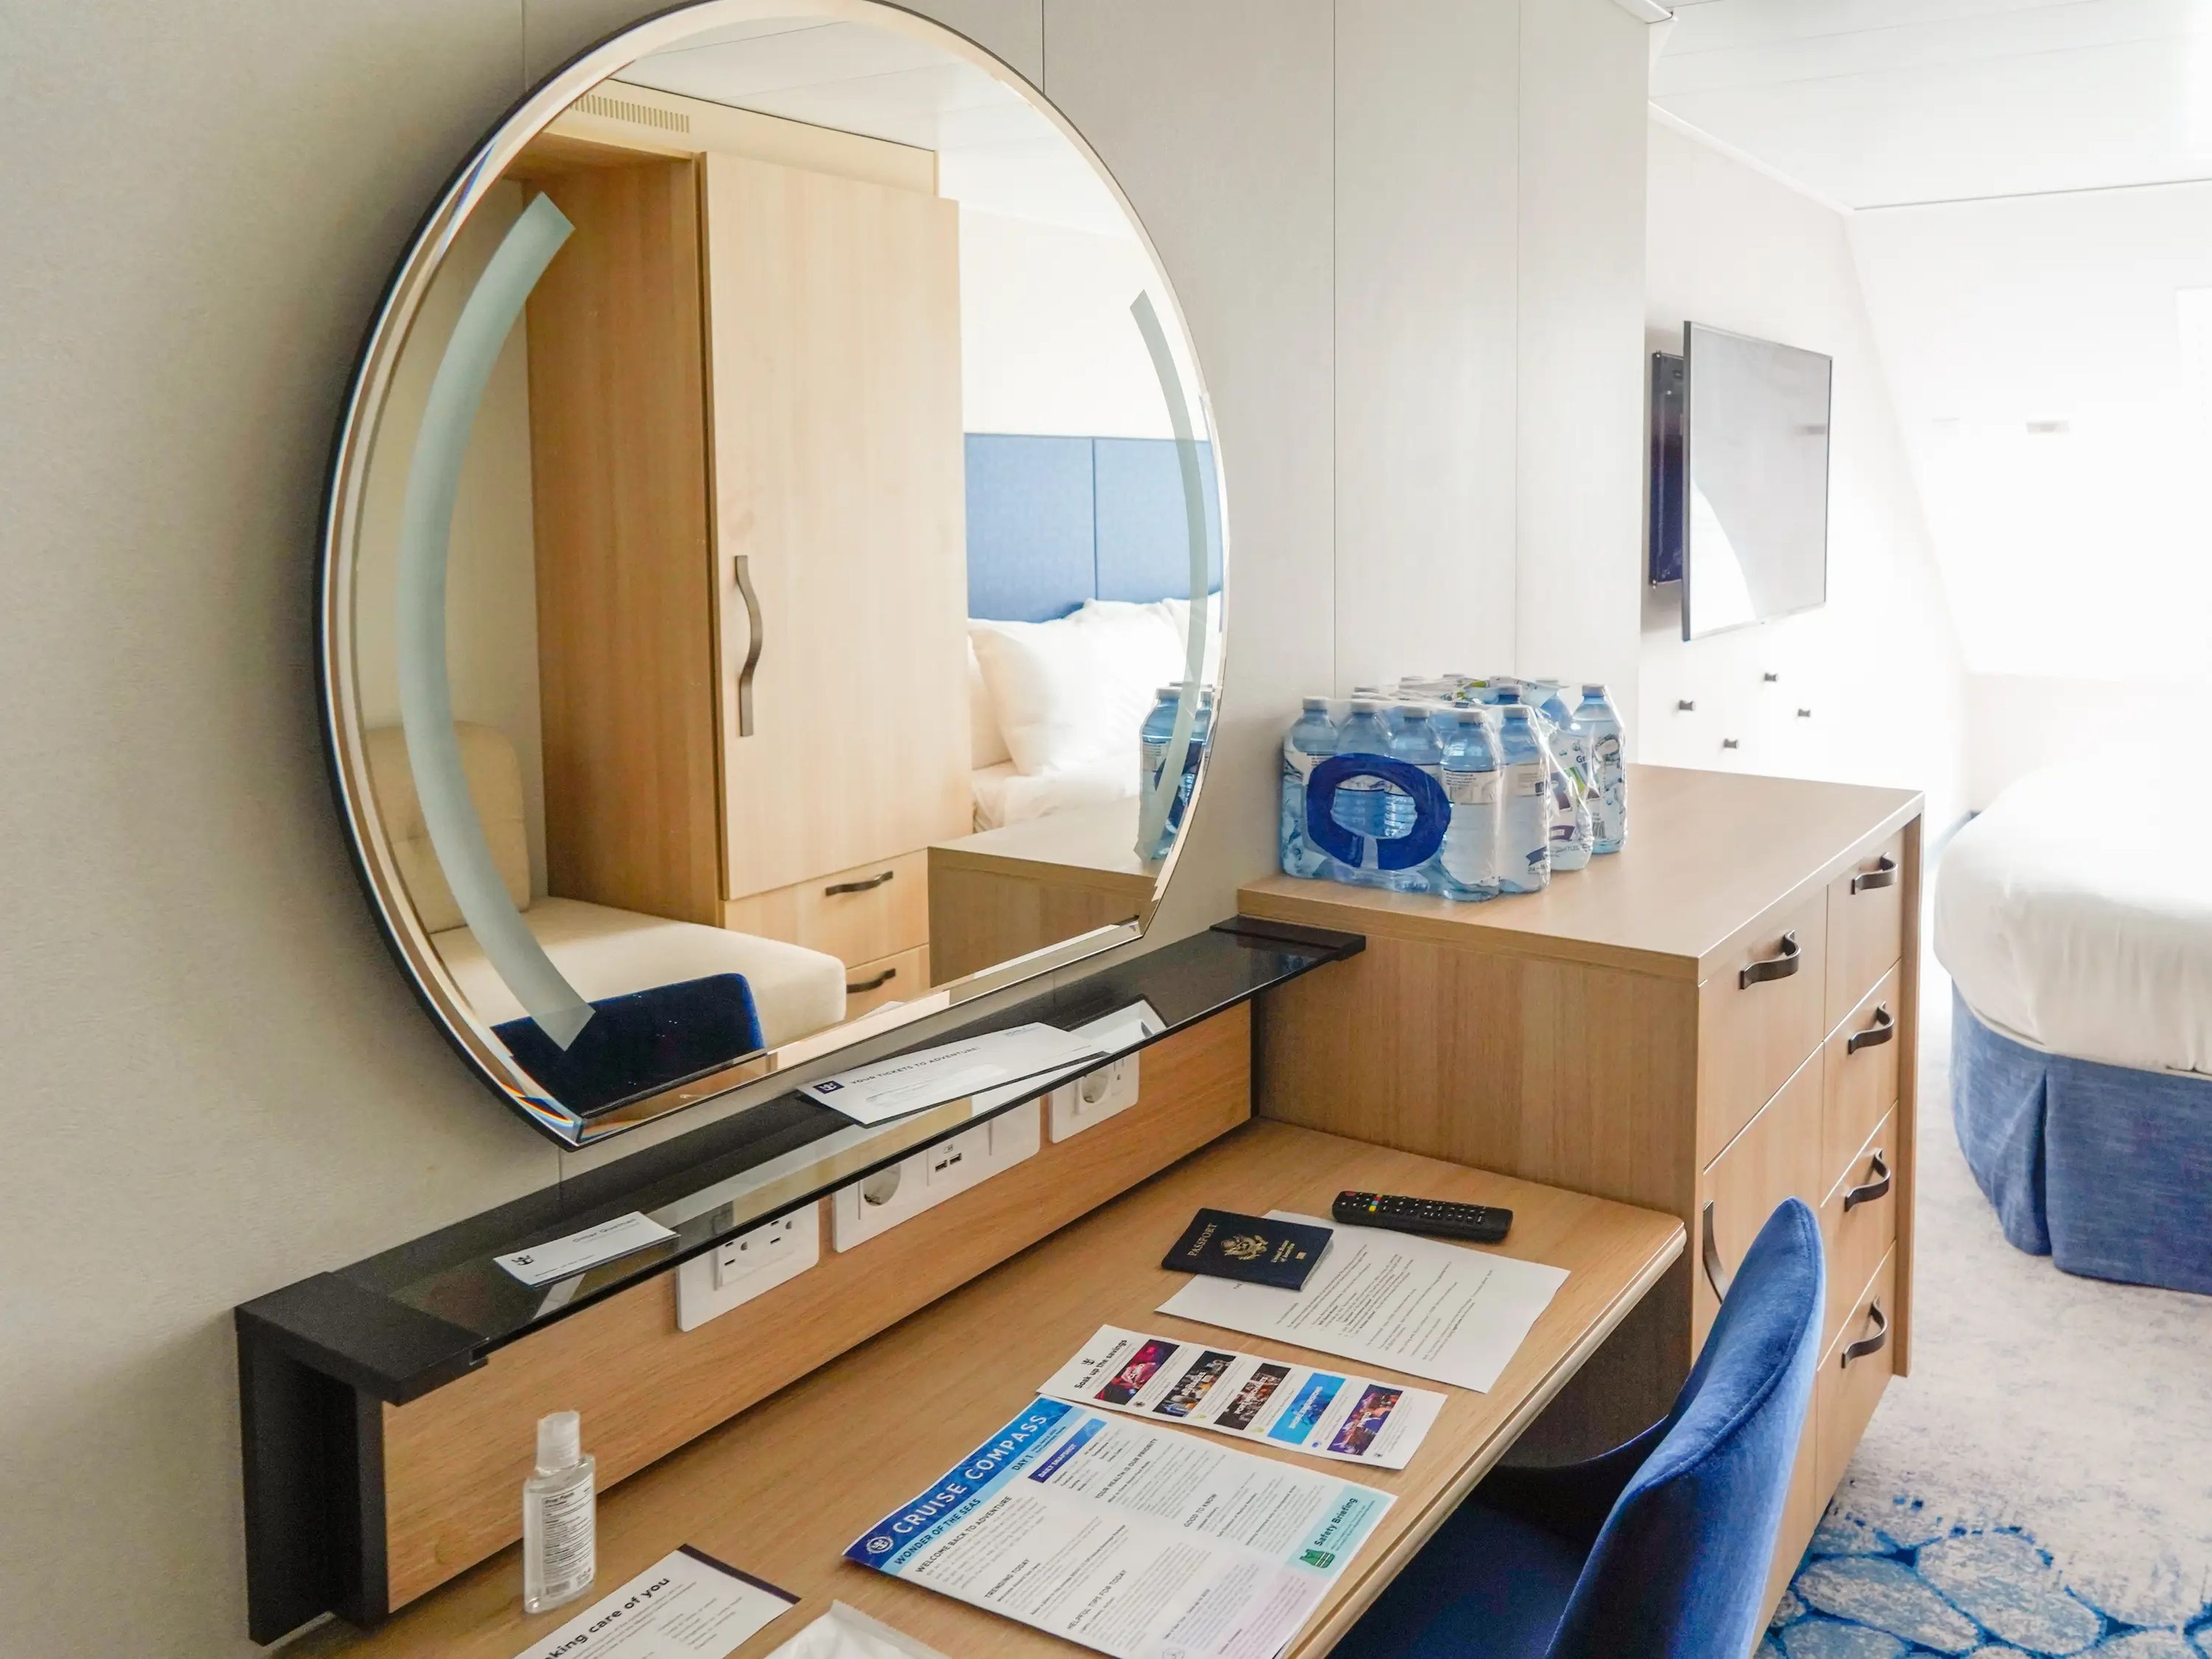 Inside a stateroom on the world's largest cruise ship